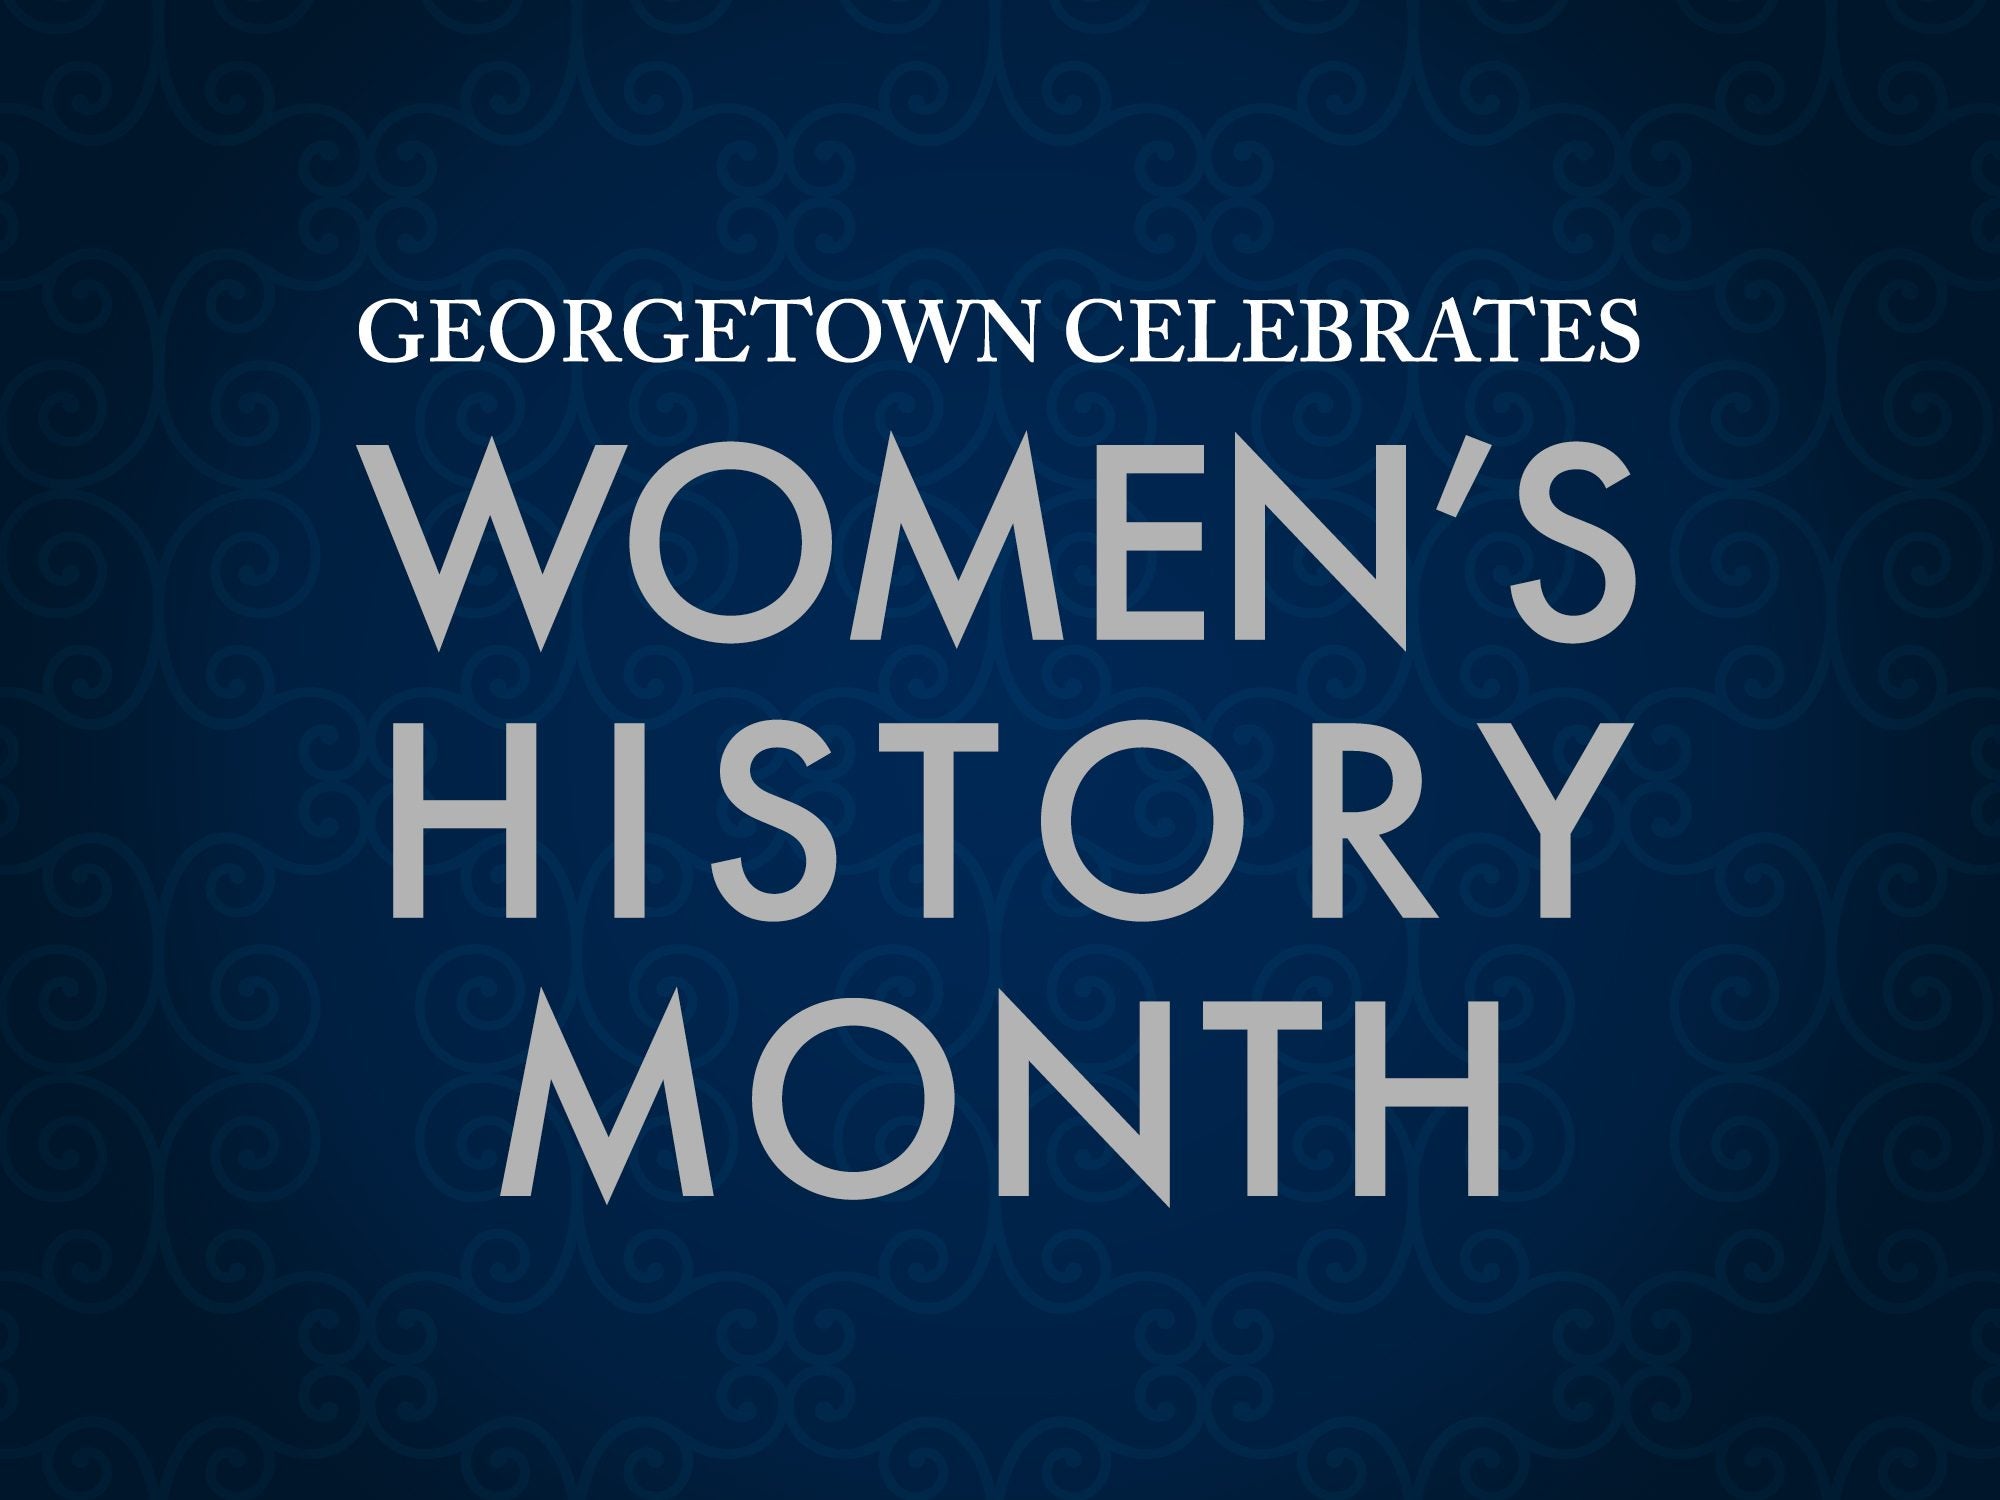 Navy background, white text: Georgetown Celebrates Women's History Month